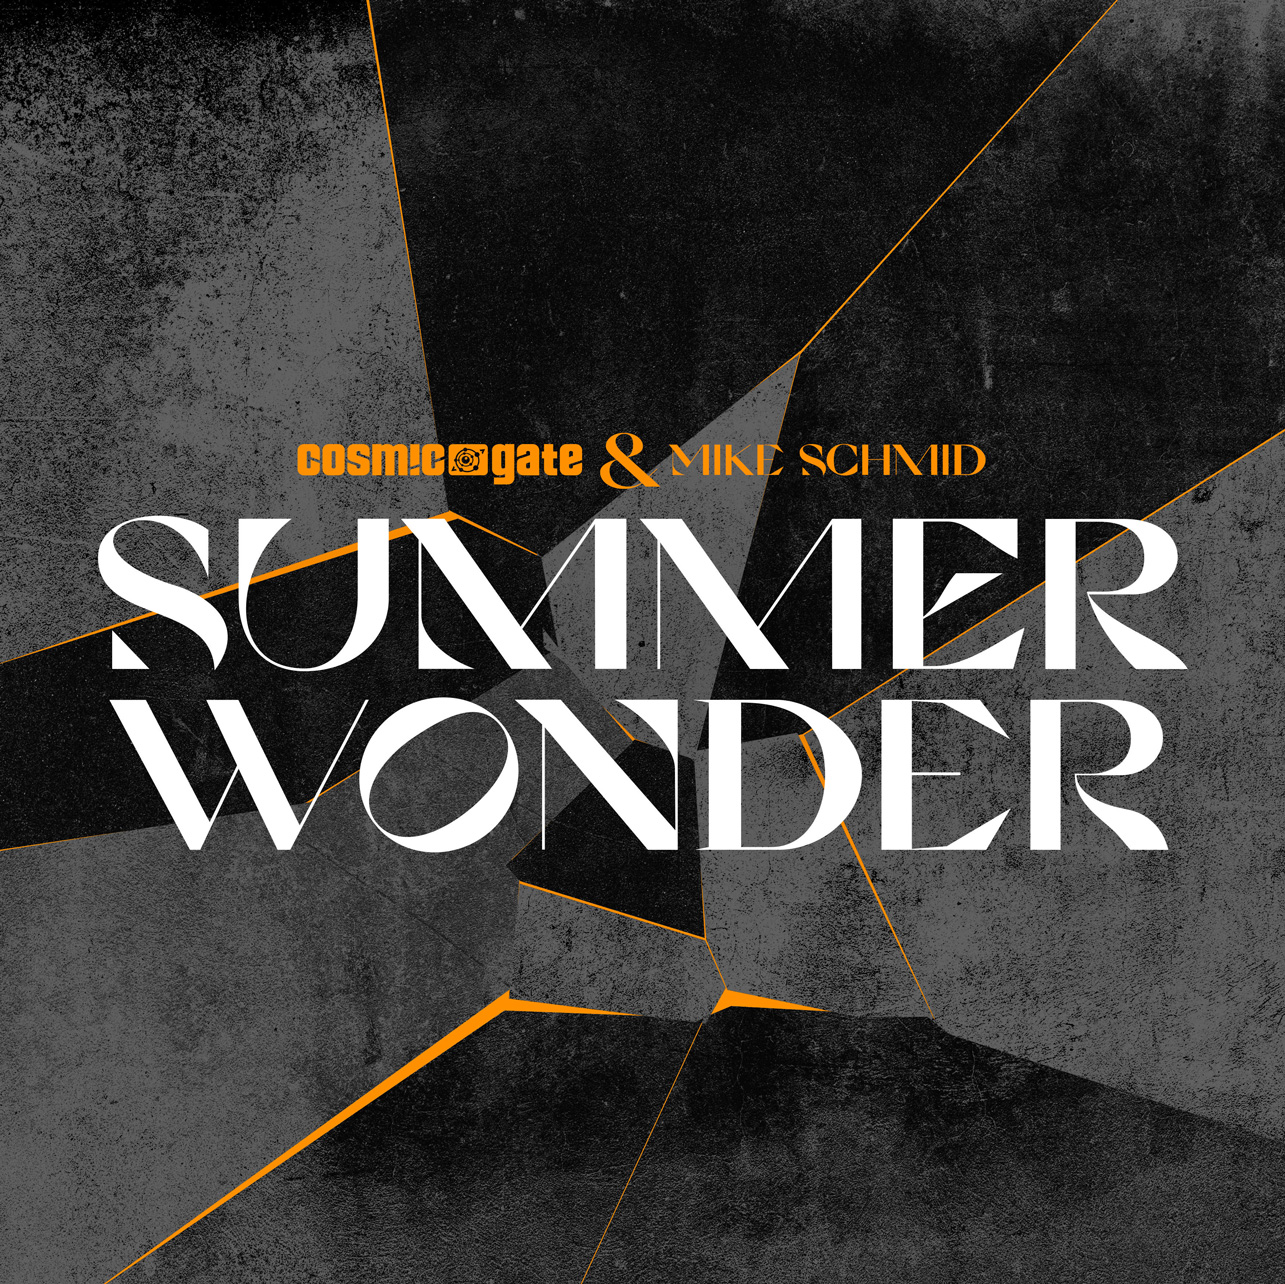 Cosmic Gate and Mike Schmid presents Summer Wonder on Black Hole Recordings